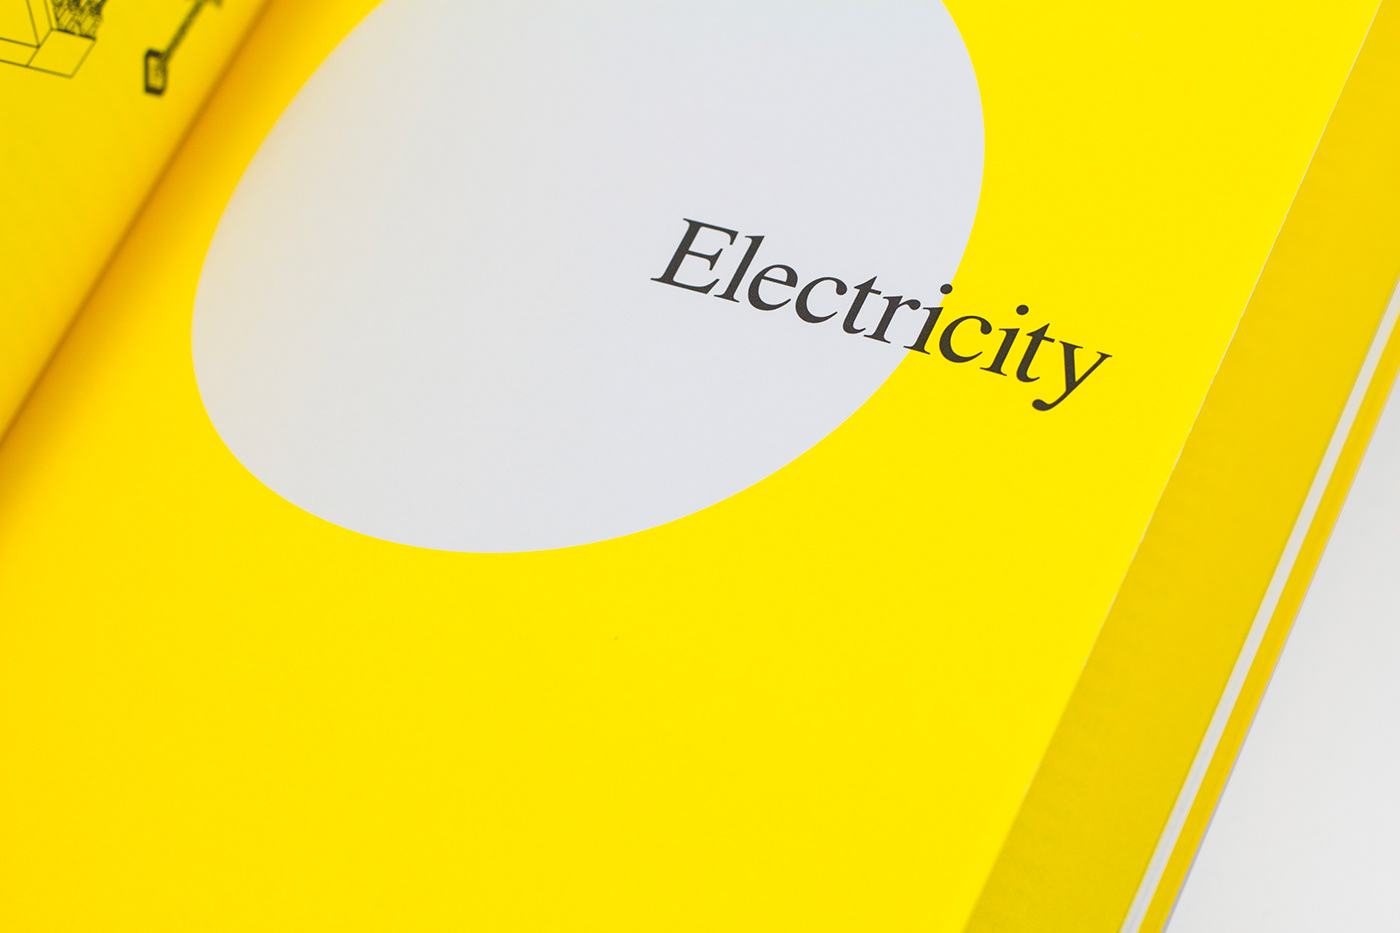 design Layout ILLUSTRATION  book publication yellow energy law windmill infographic